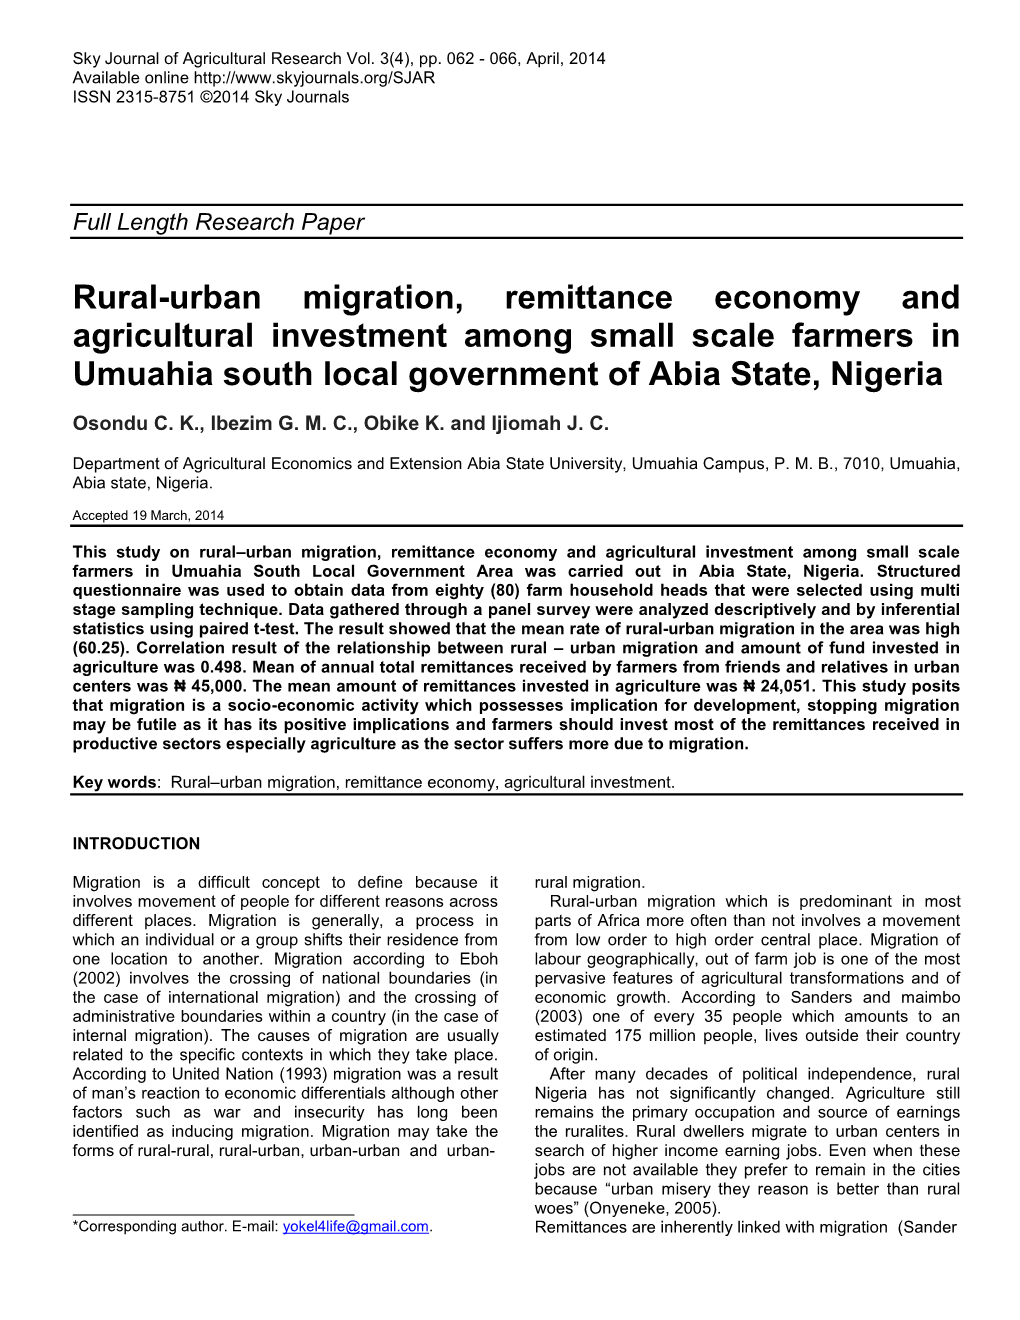 Rural-Urban Migration, Remittance Economy and Agricultural Investment Among Small Scale Farmers in Umuahia South Local Government of Abia State, Nigeria